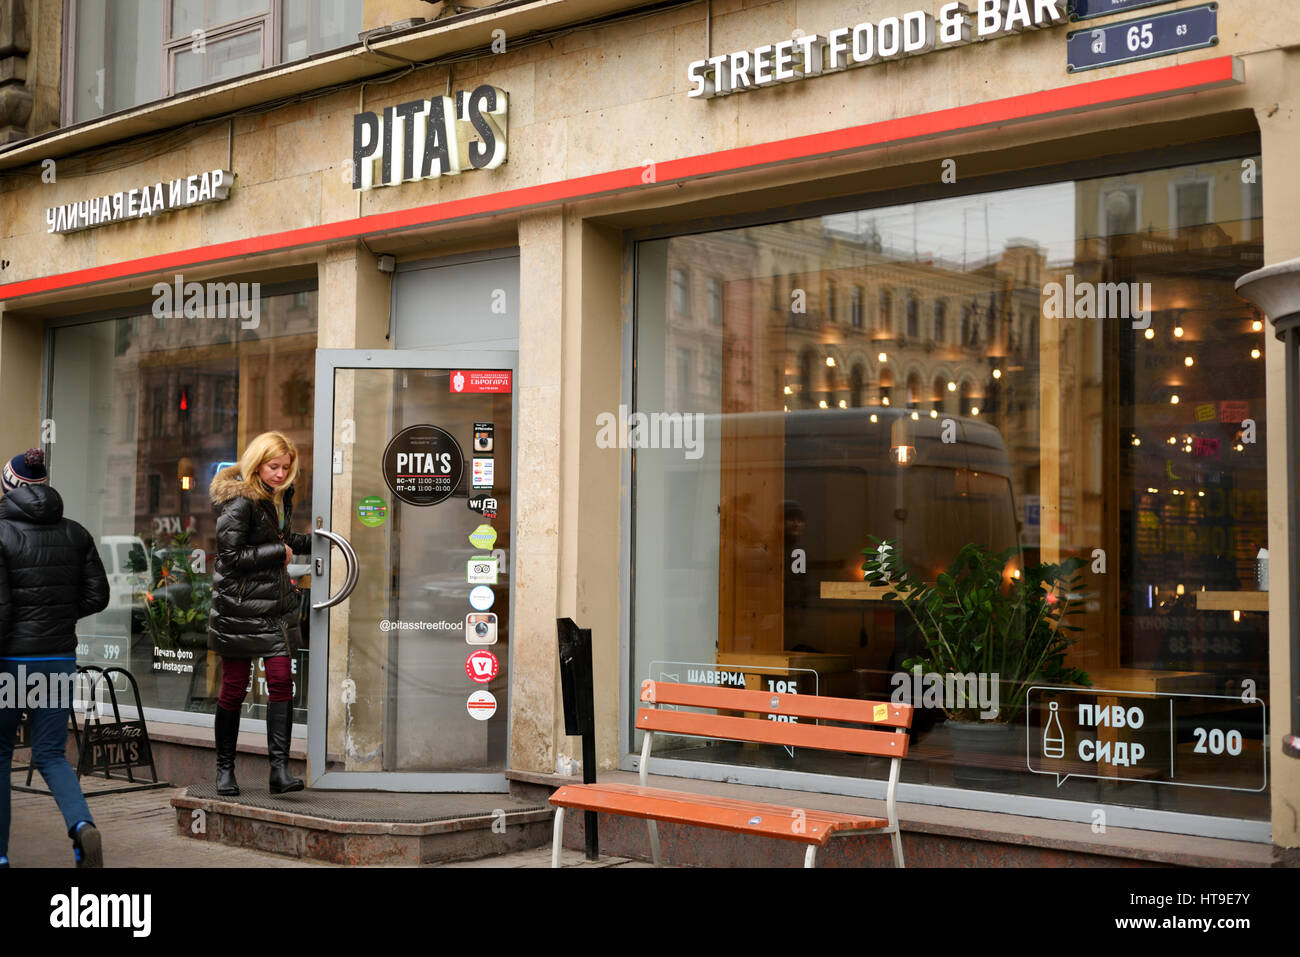 Pita's street food and bar on the Nevsky avenue, St. Petersburg, Russia Stock Photo